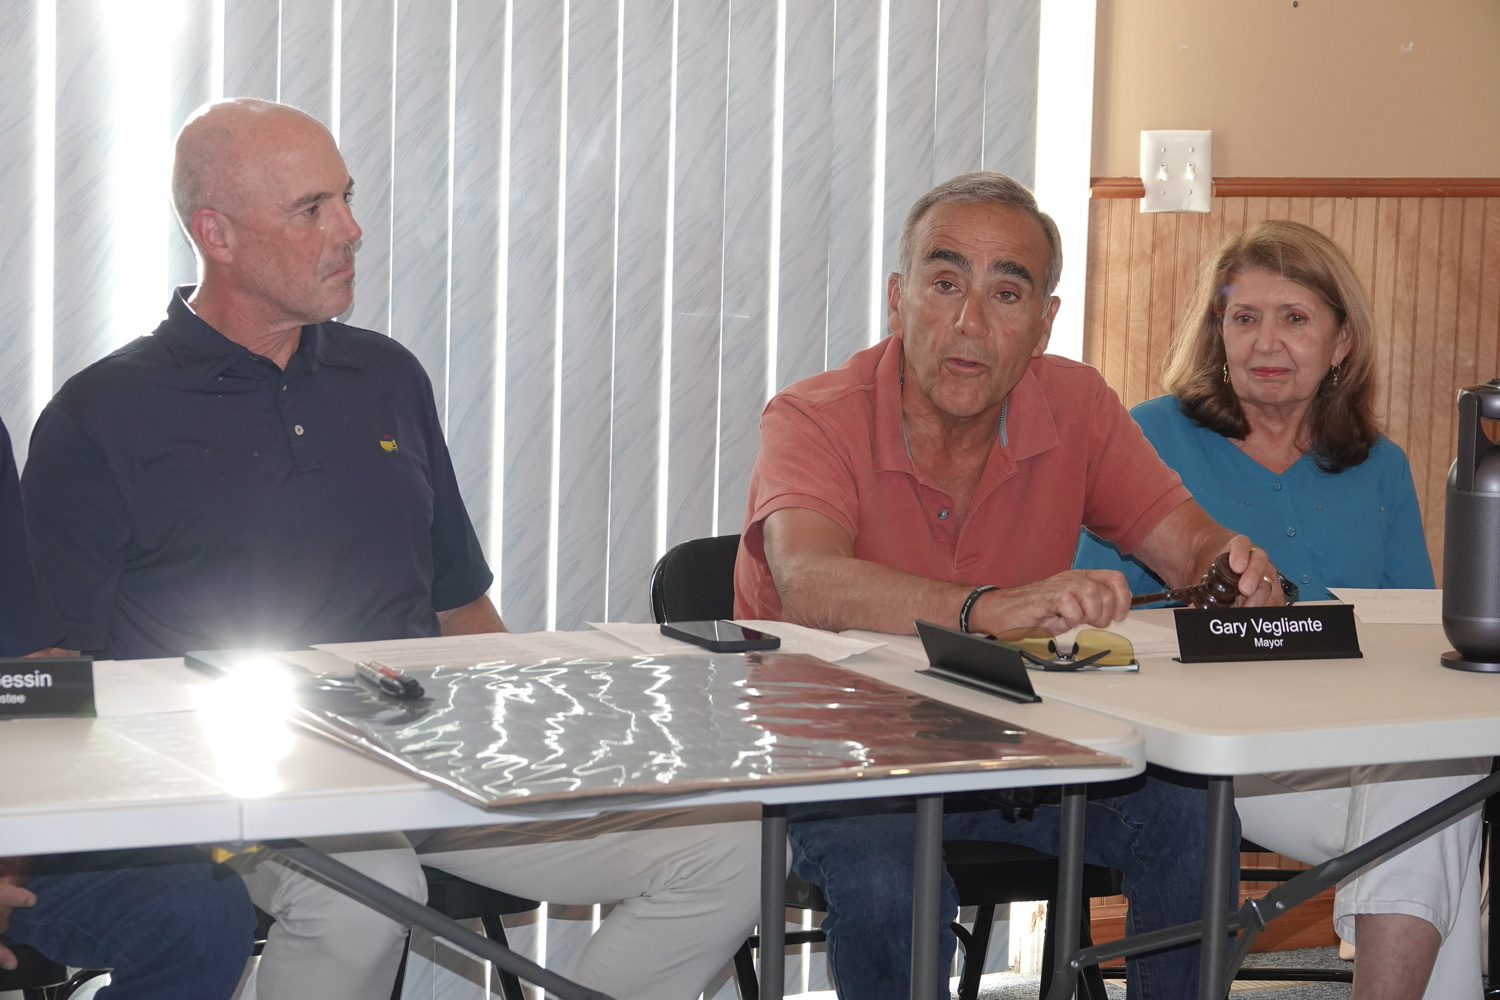 Mayor Gary Vegliante oversaw his last West Hampton Dune Village Board meeting on Friday, June 28, after more than 30 years as mayor. MICHAEL WRIGHT